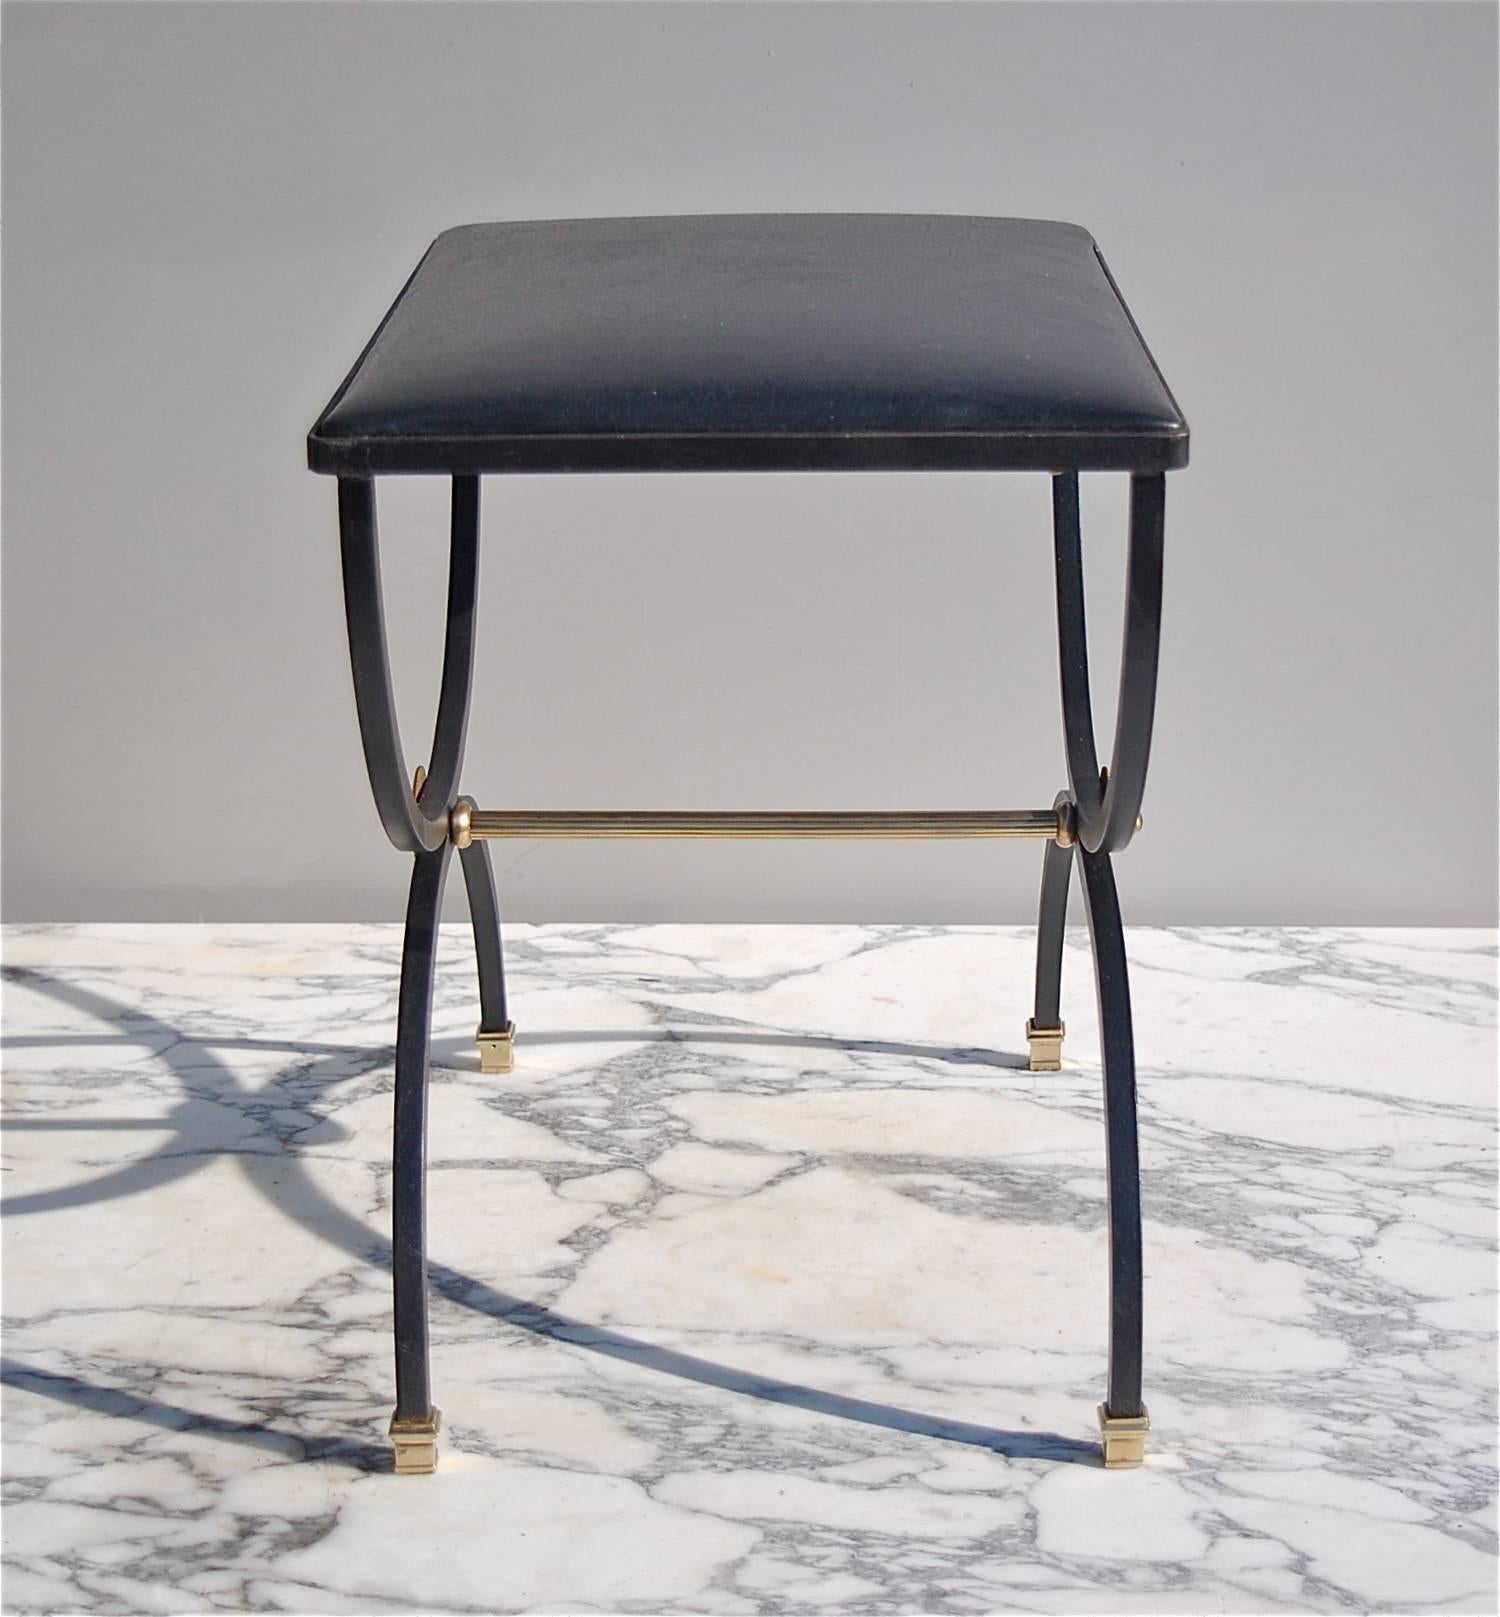 French Empire, neoclassical style ottoman or X-shaped foot stool. It has a curvilinear X-frame form made from black lacquered metal resting on brass square feet. It has a central fluted, tubular brass support with round finials at each end.